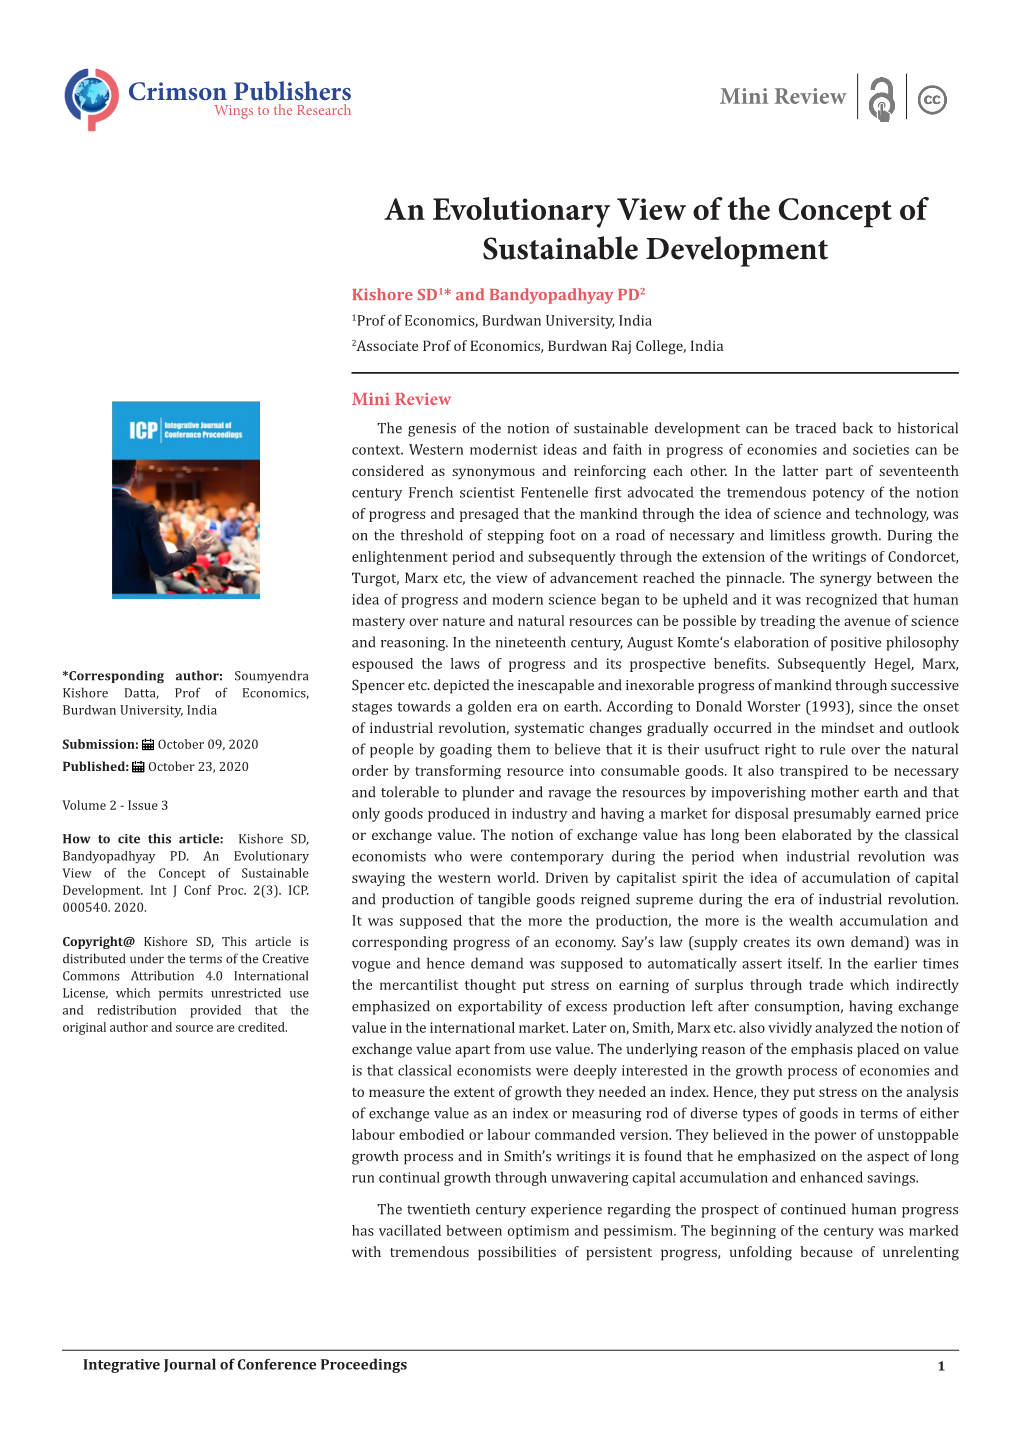 An Evolutionary View of the Concept of Sustainable Development